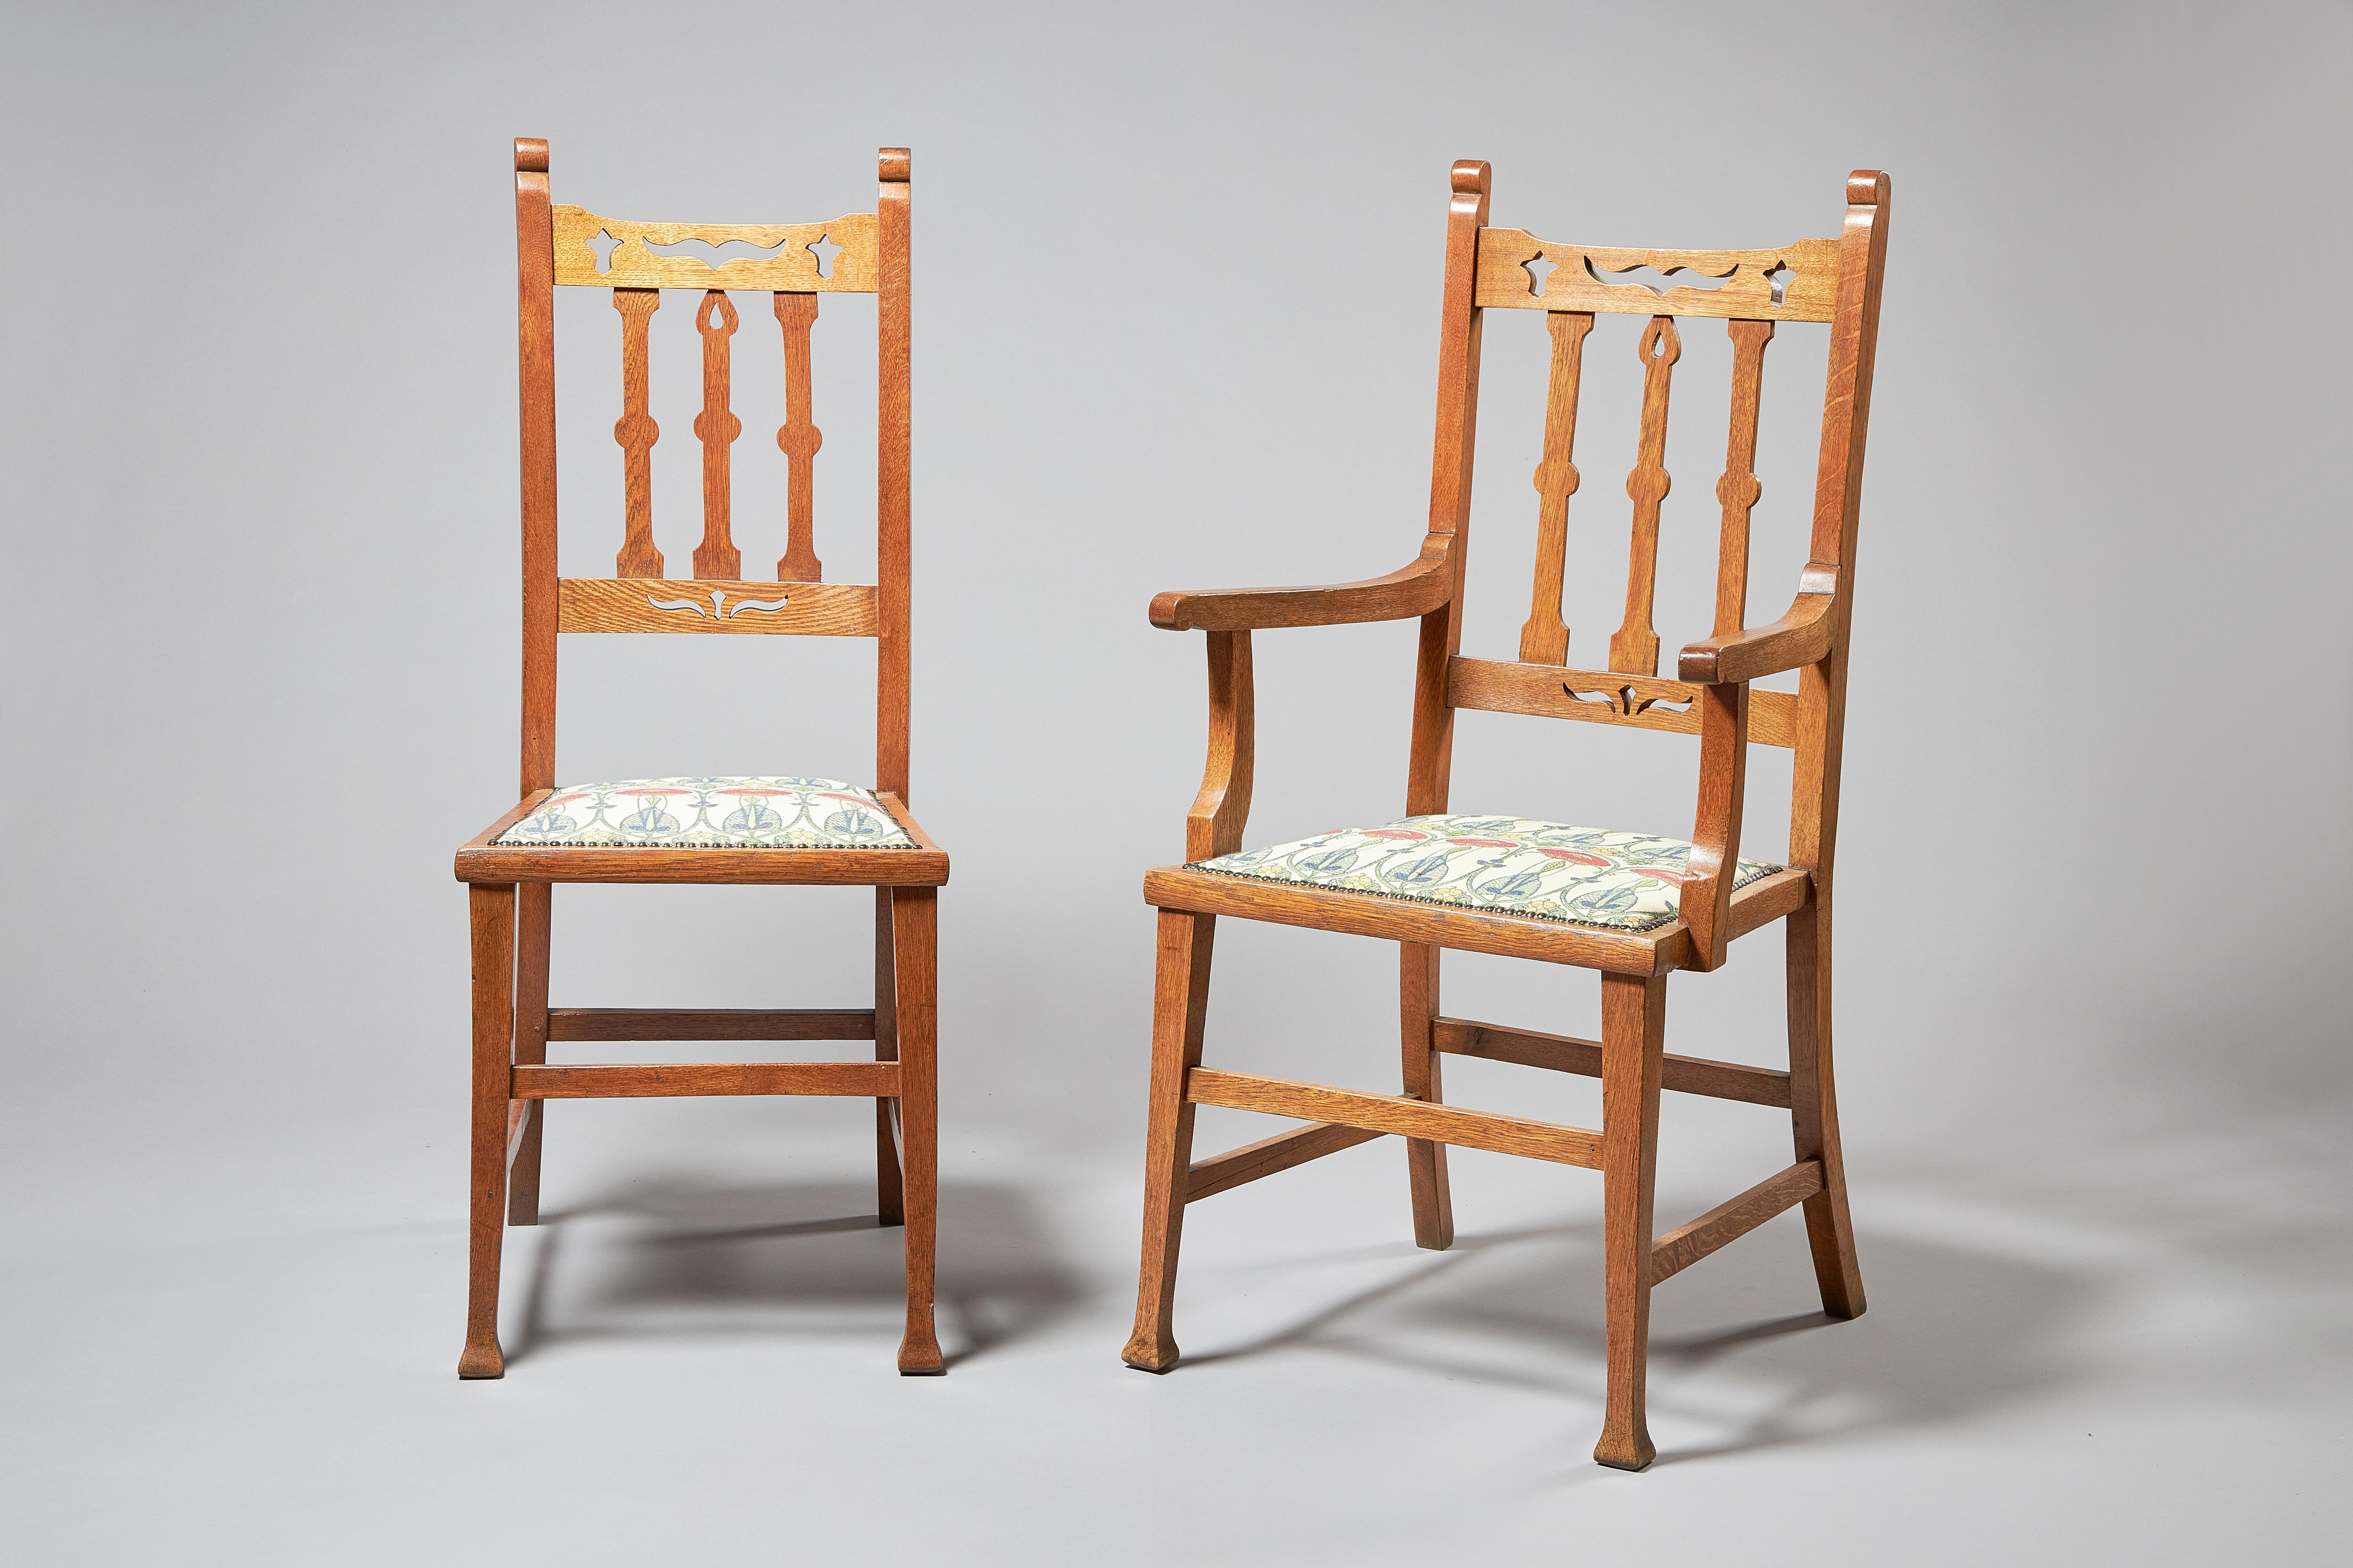 A set of eight Arts & Crafts oak dining chairs, including two carvers, with squared arms, early 20th century, circa 1900-1910, with latticed backs and carved details, the seats upholstered in Charles Rennie Mackintosh 'Belle Epoque' fabric.